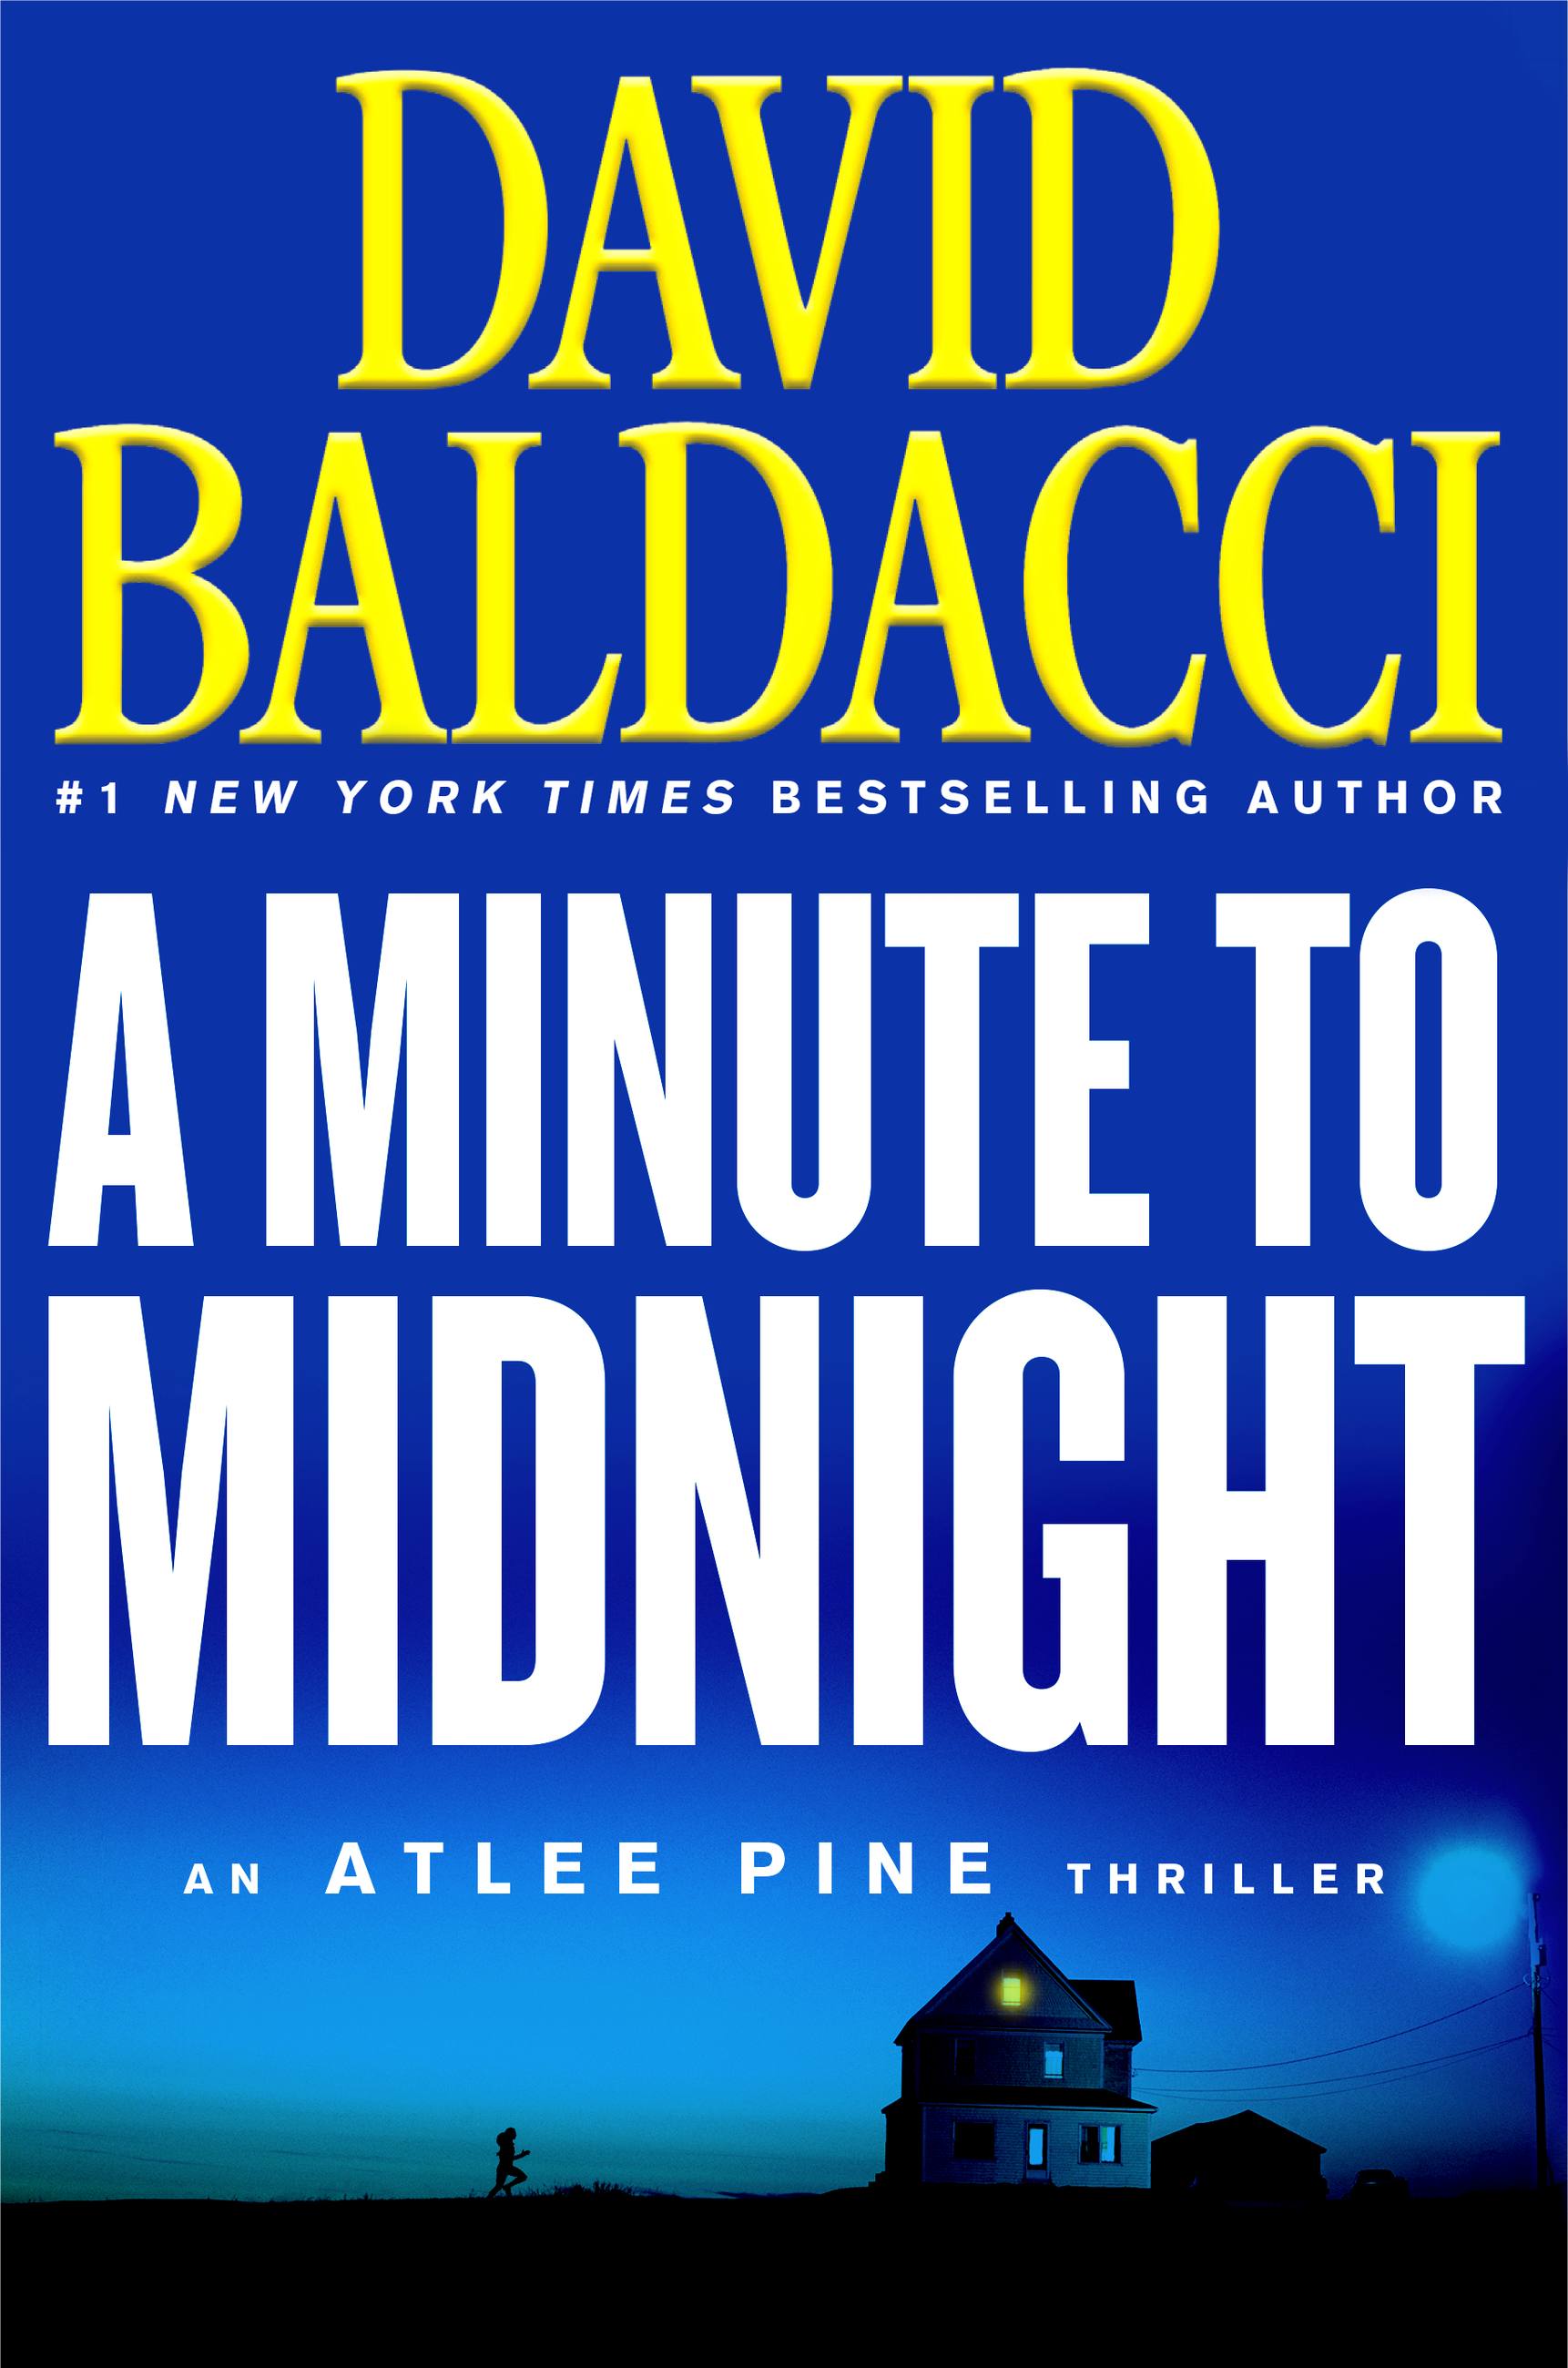 An Atlee Pine Thriller: A Minute to Midnight (Series #2) (Hardcover) - image 1 of 1